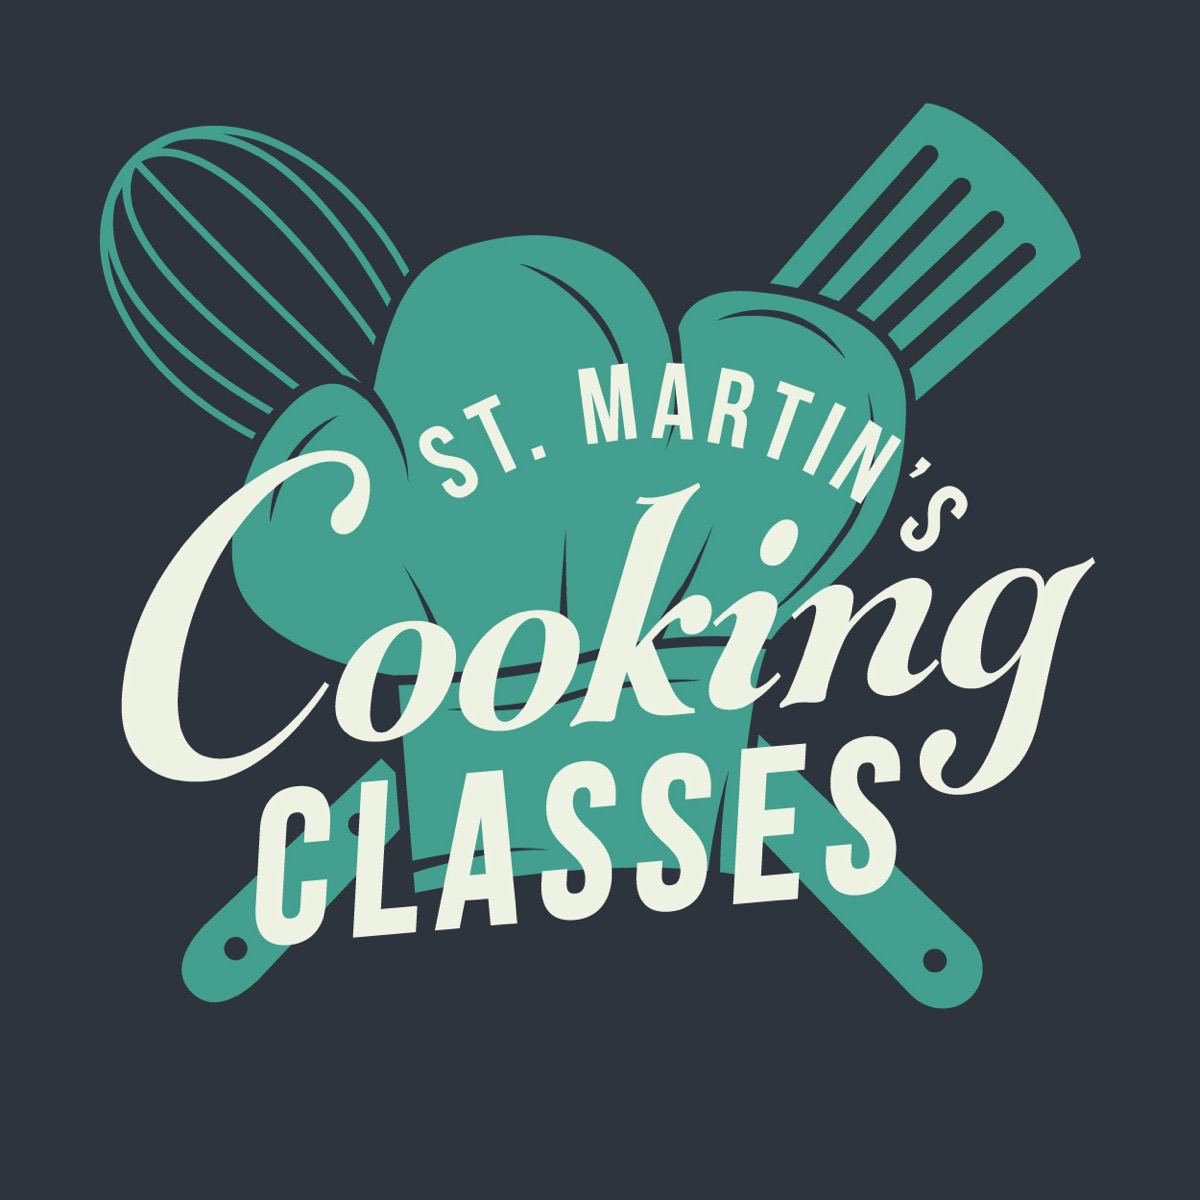 Featured image for “St. Martin’s Cooking Classes”